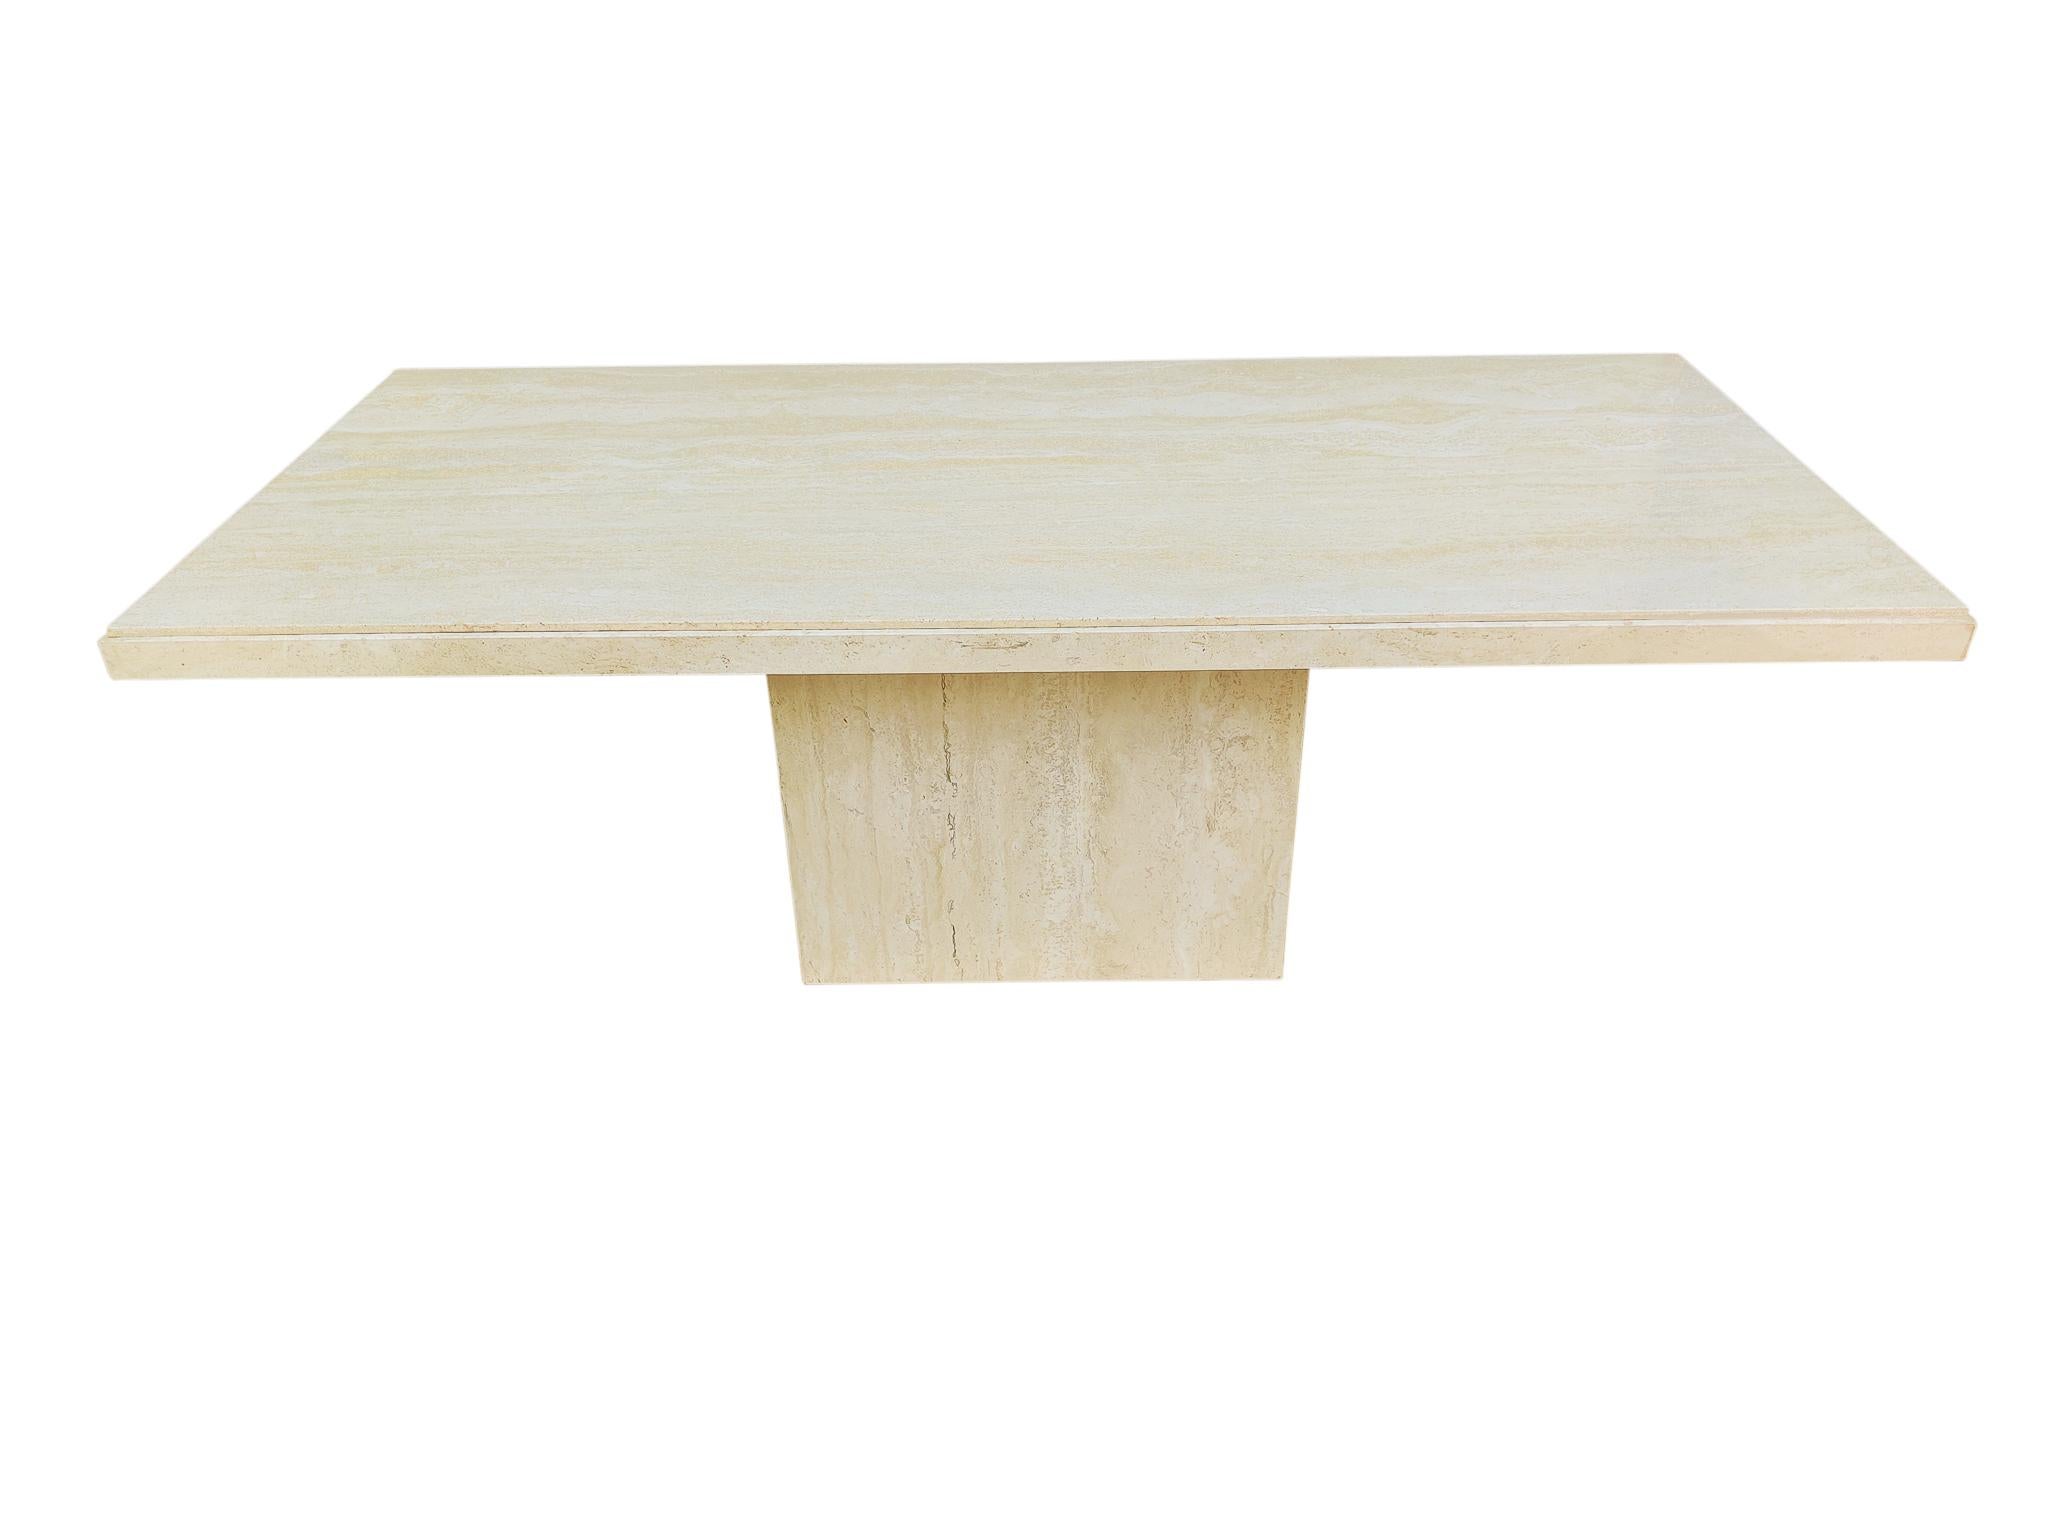 Simple is so often better! This elegant rectangular dining table shows us that. Filled and polished travertine-marble, with just the right amount of attractive natural grain. And a burnished low luster yet highly durable finish. A small channel